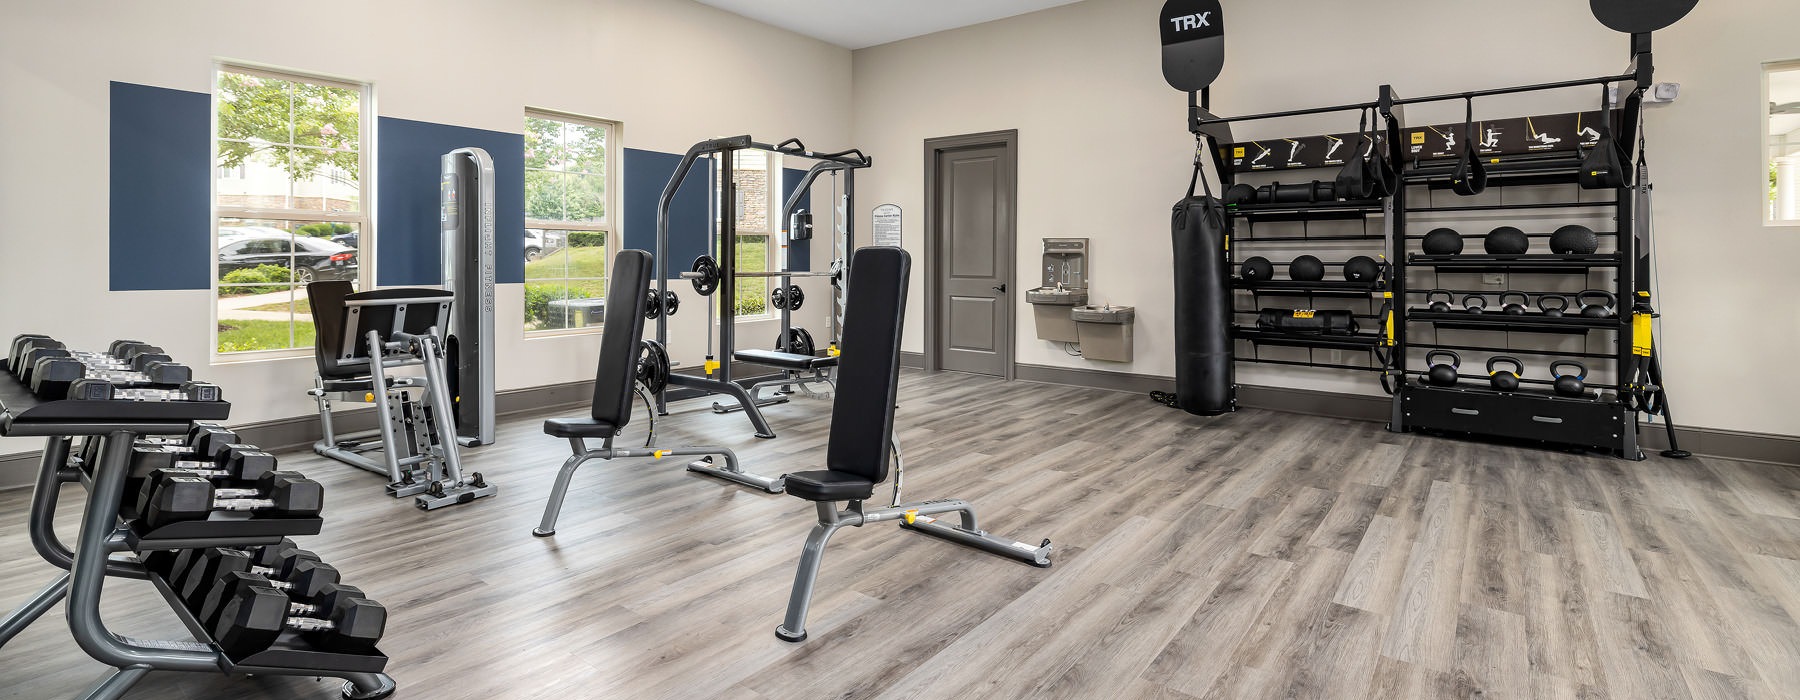 spacious fitness center with ample lighting